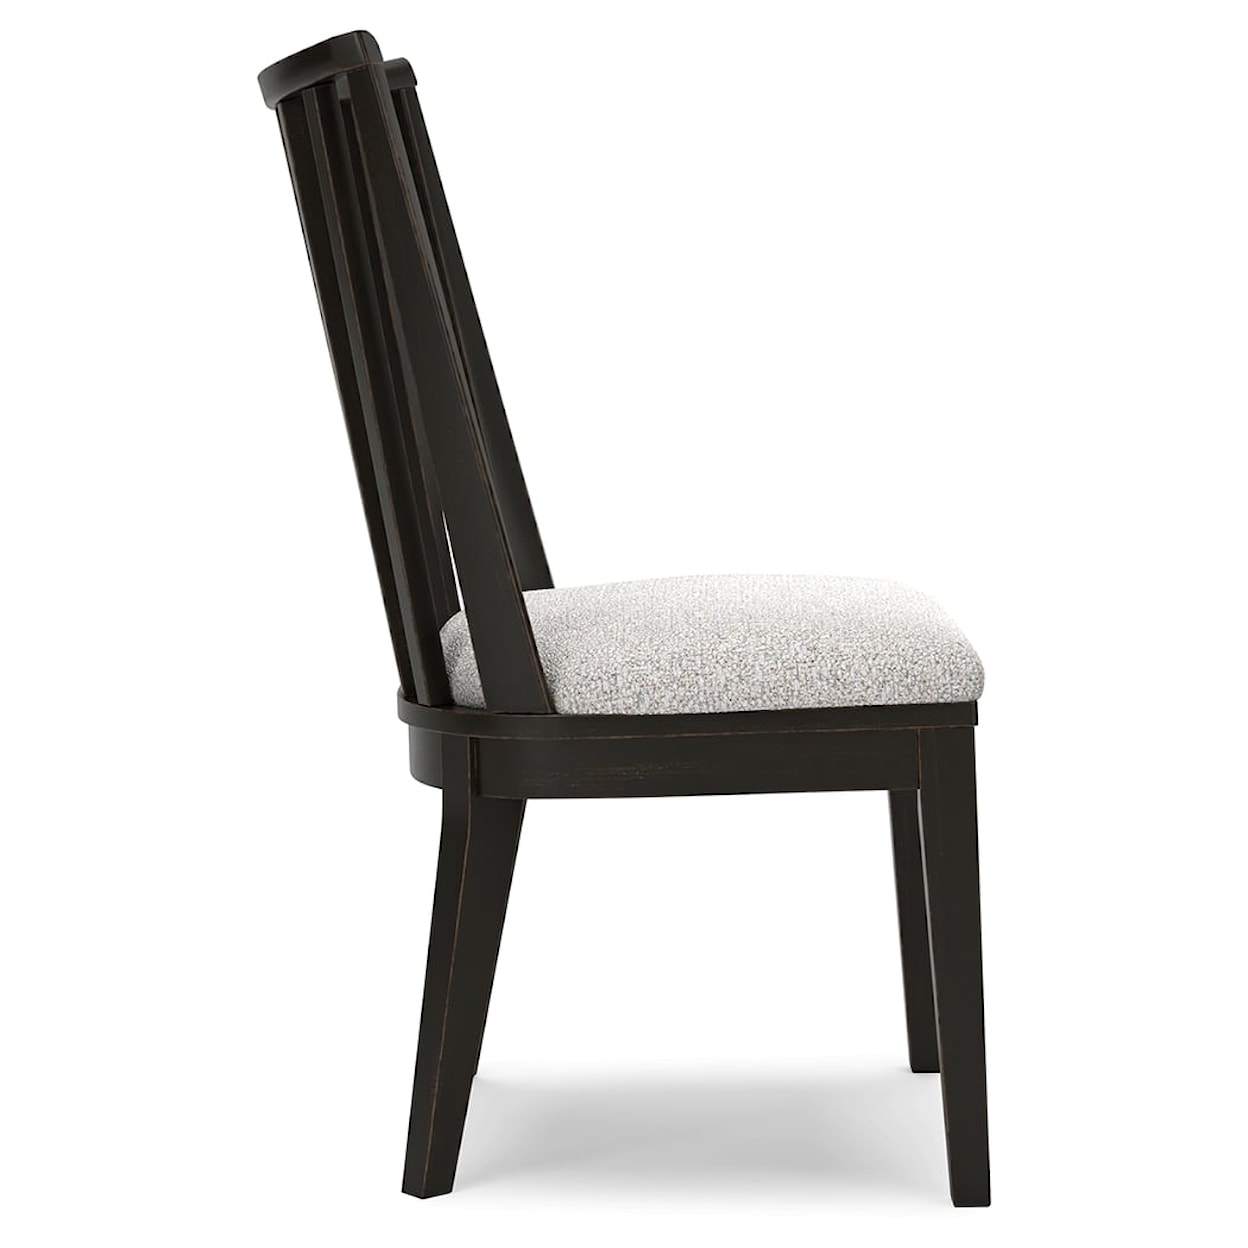 Signature Design by Ashley Furniture Galliden Dining Chair